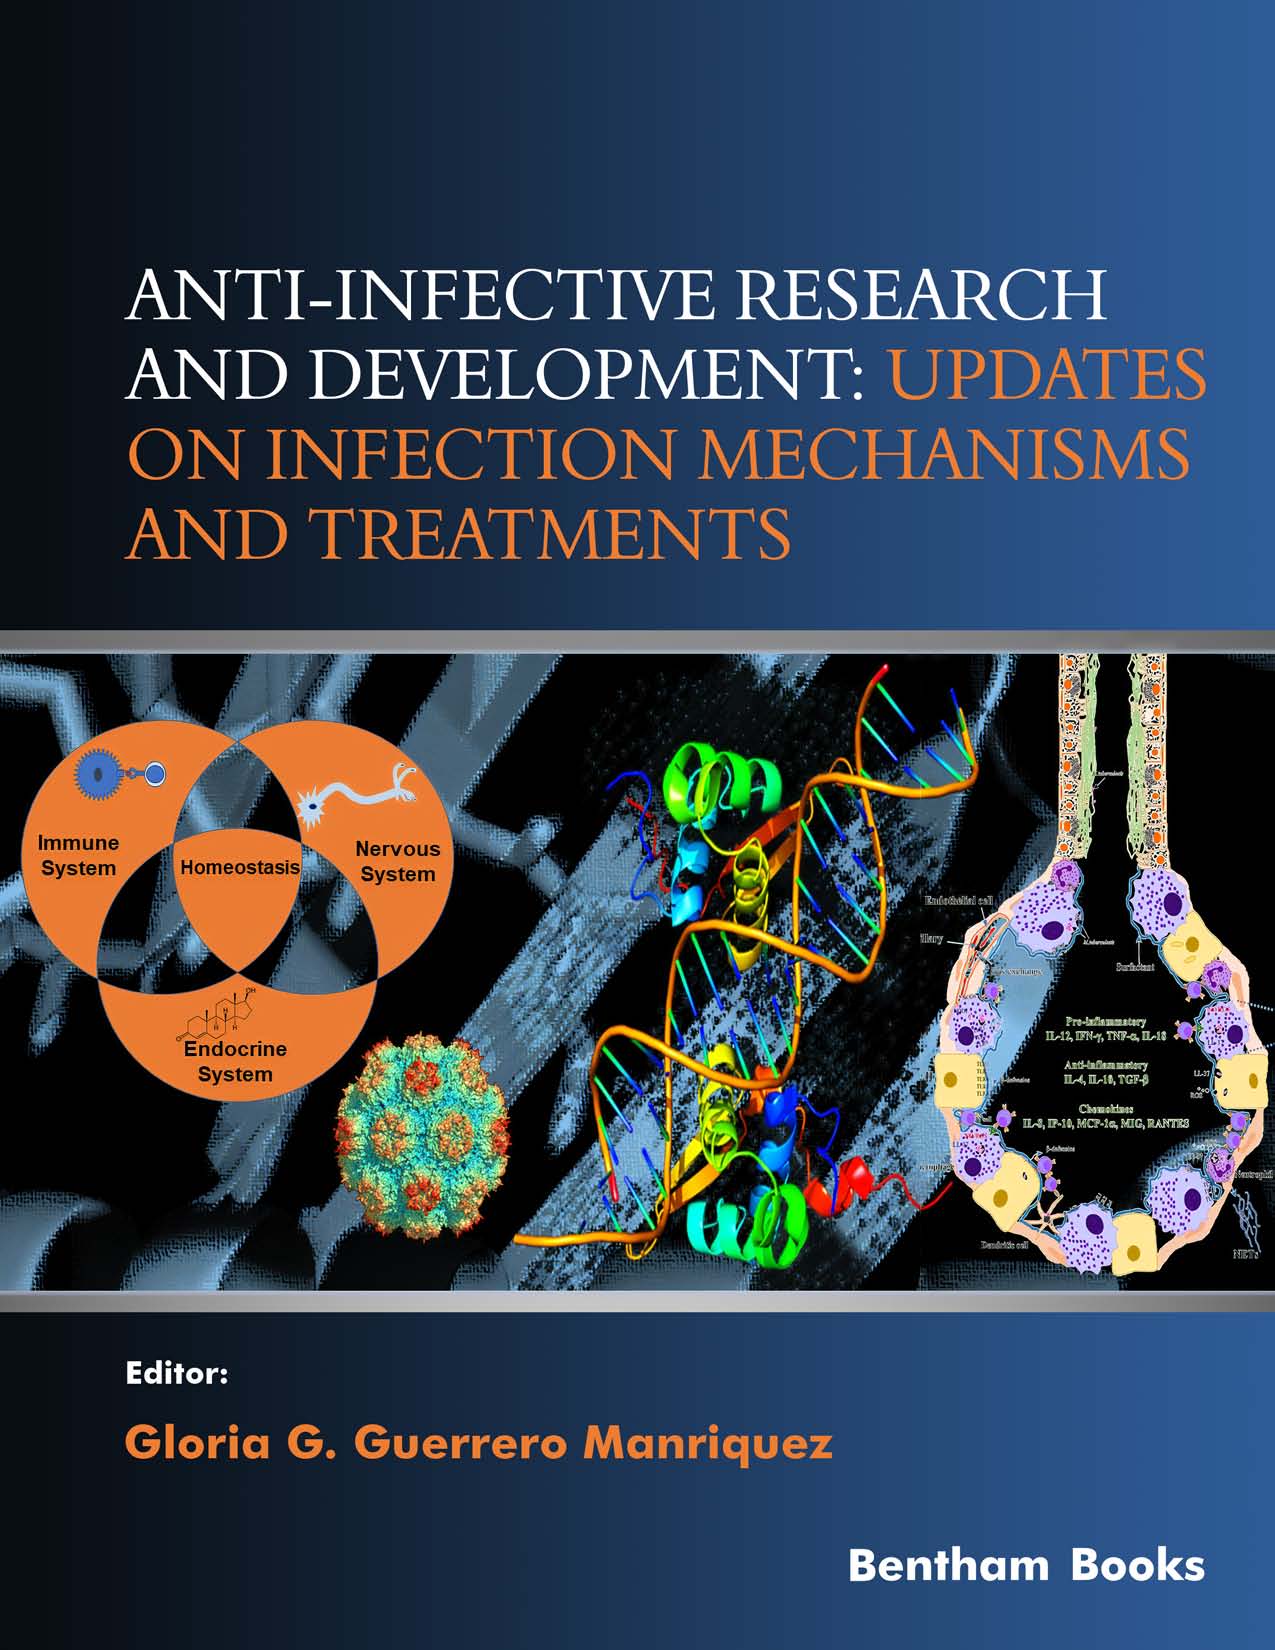 Anti-infective Research and Development: Updates on Infection Mechanisms and Treatments